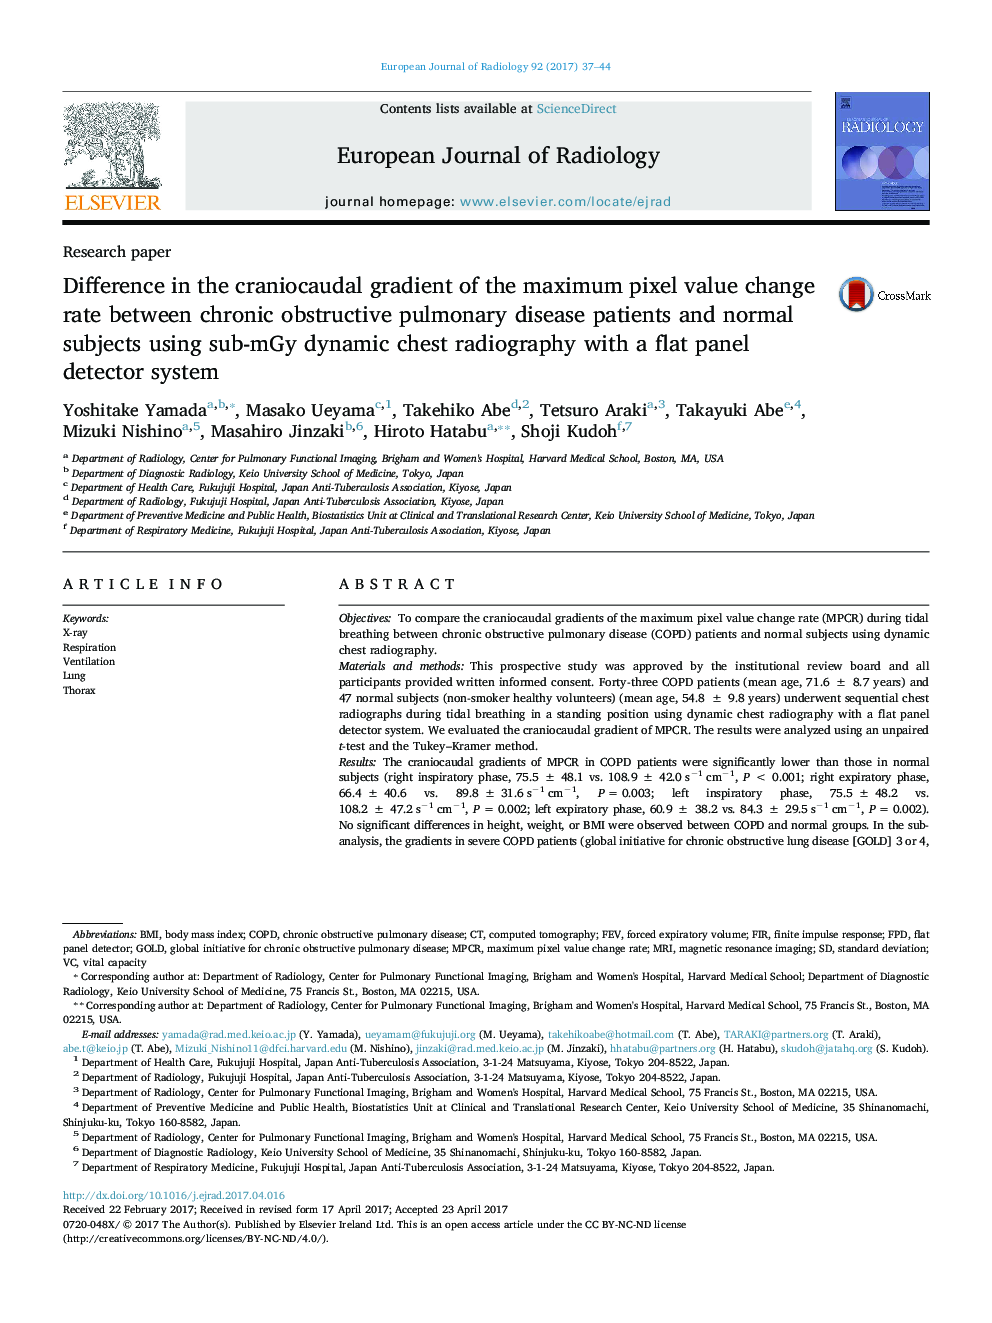 Research paperDifference in the craniocaudal gradient of the maximum pixel value change rate between chronic obstructive pulmonary disease patients and normal subjects using sub-mGy dynamic chest radiography with a flat panel detector system